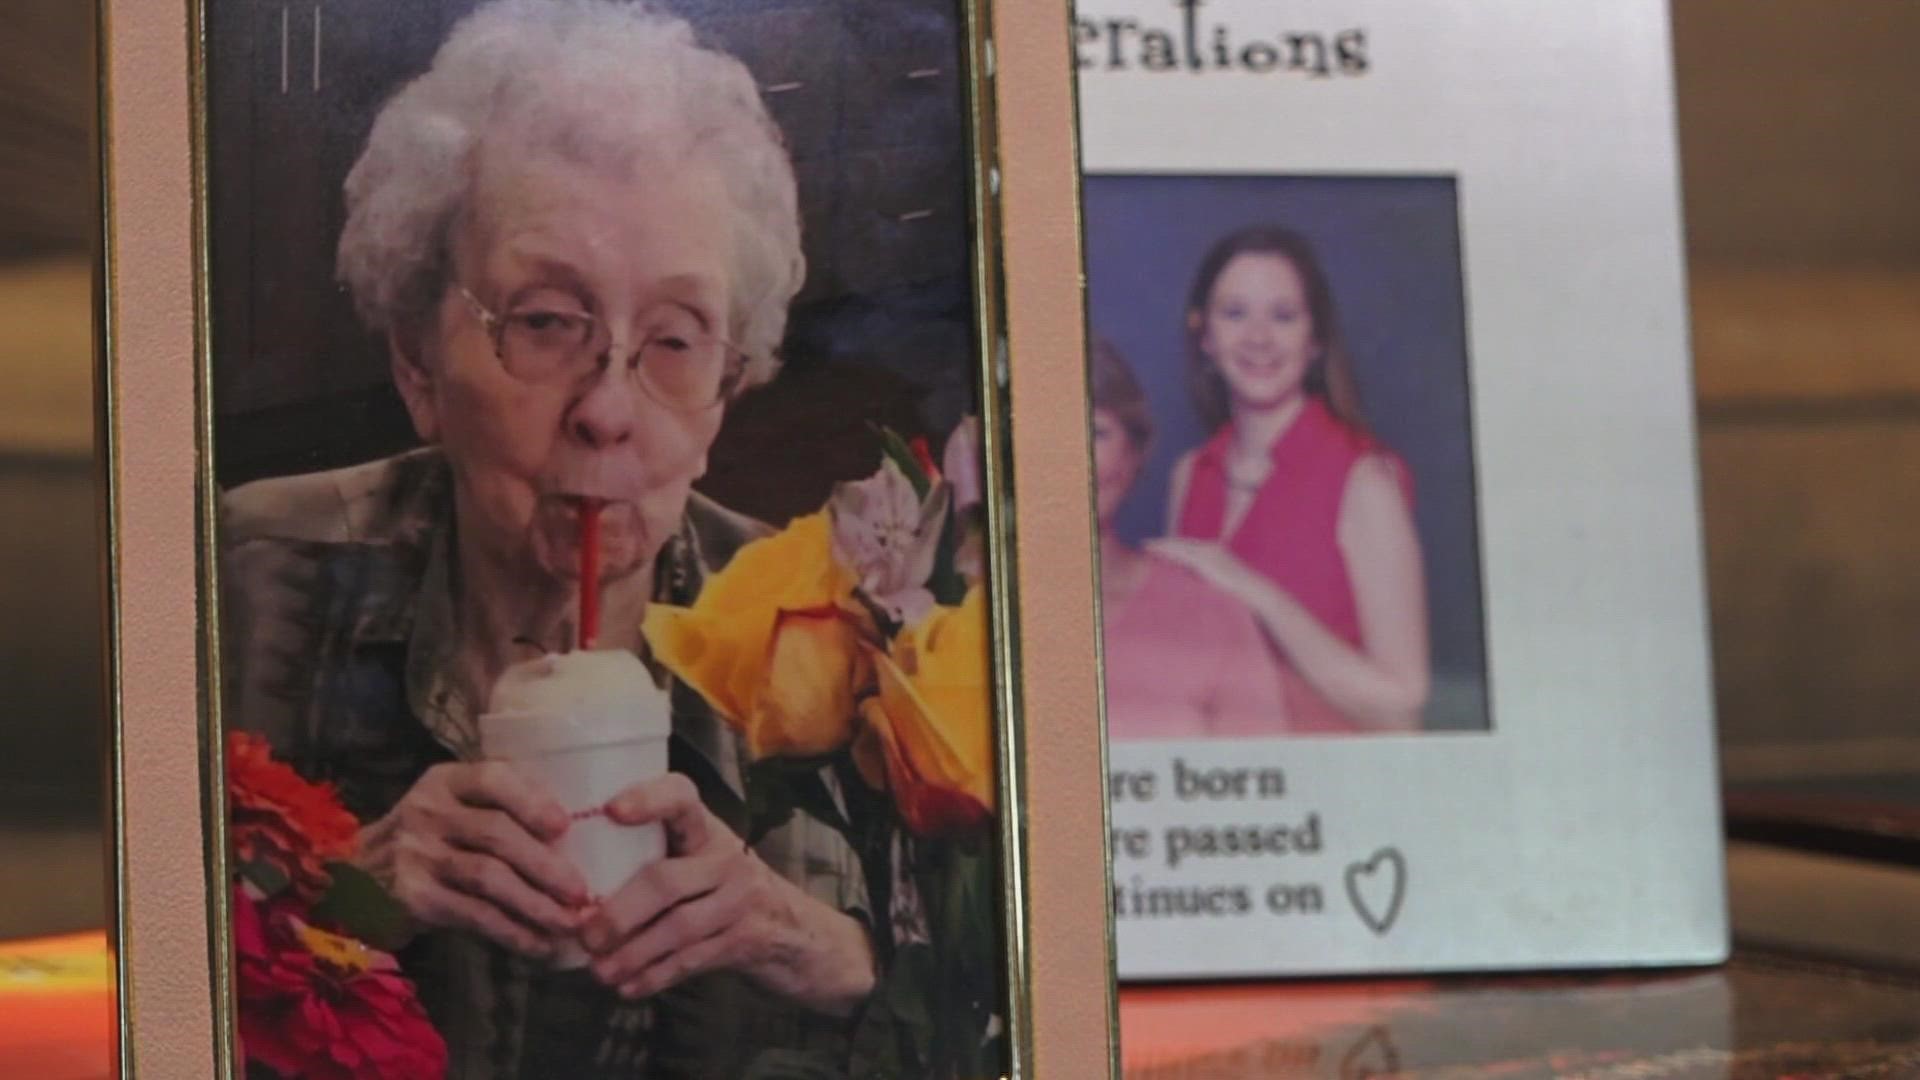 For one East Tennessee family, the taste of peach milkshakes brings back sweet memories. A late grandmother's love is living on through that flavor.